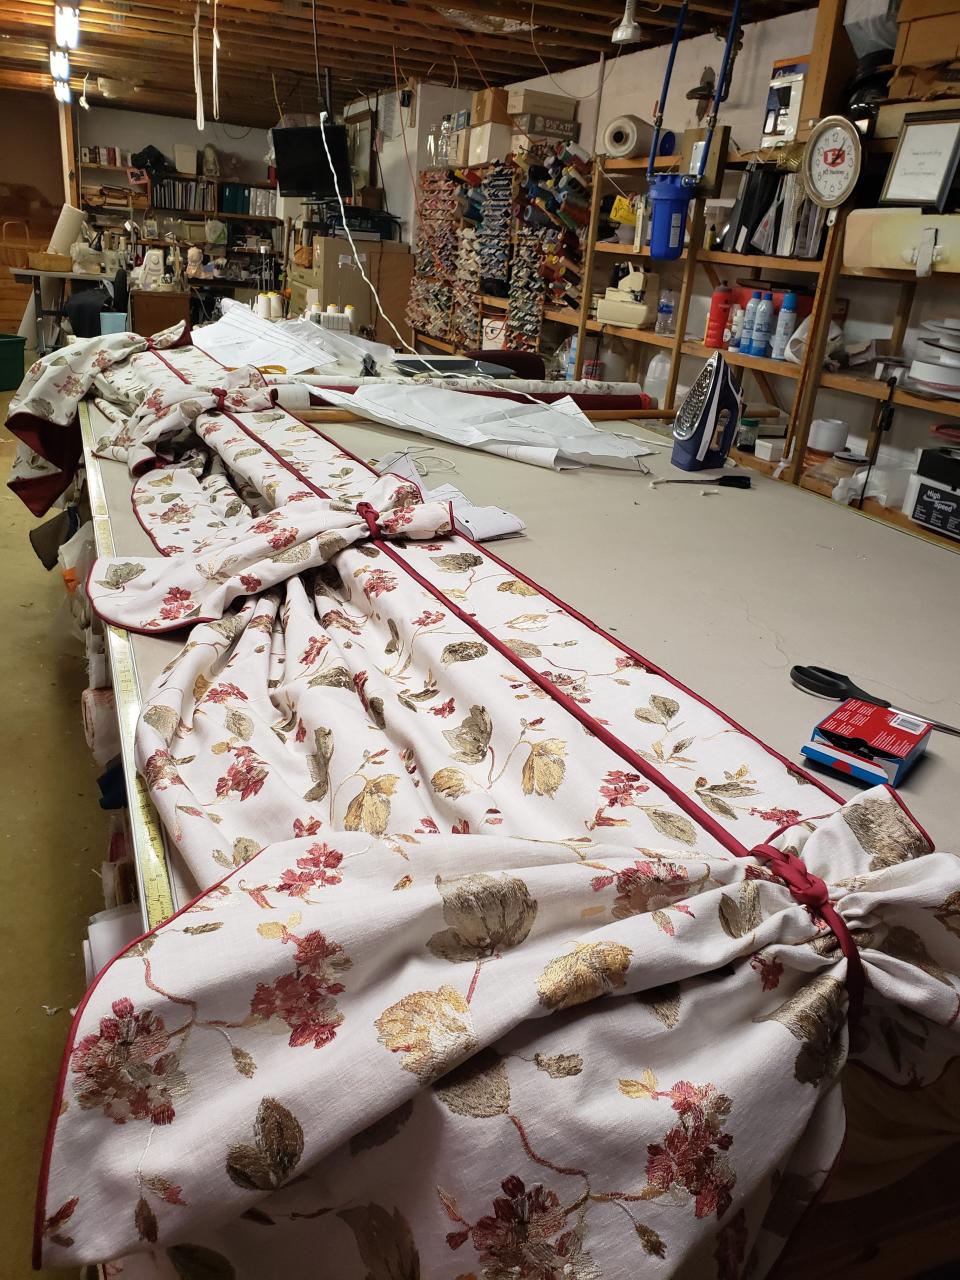 A valance that was awaiting finishing in one of Roberta Houston’s last projects is pictured at her home workroom.